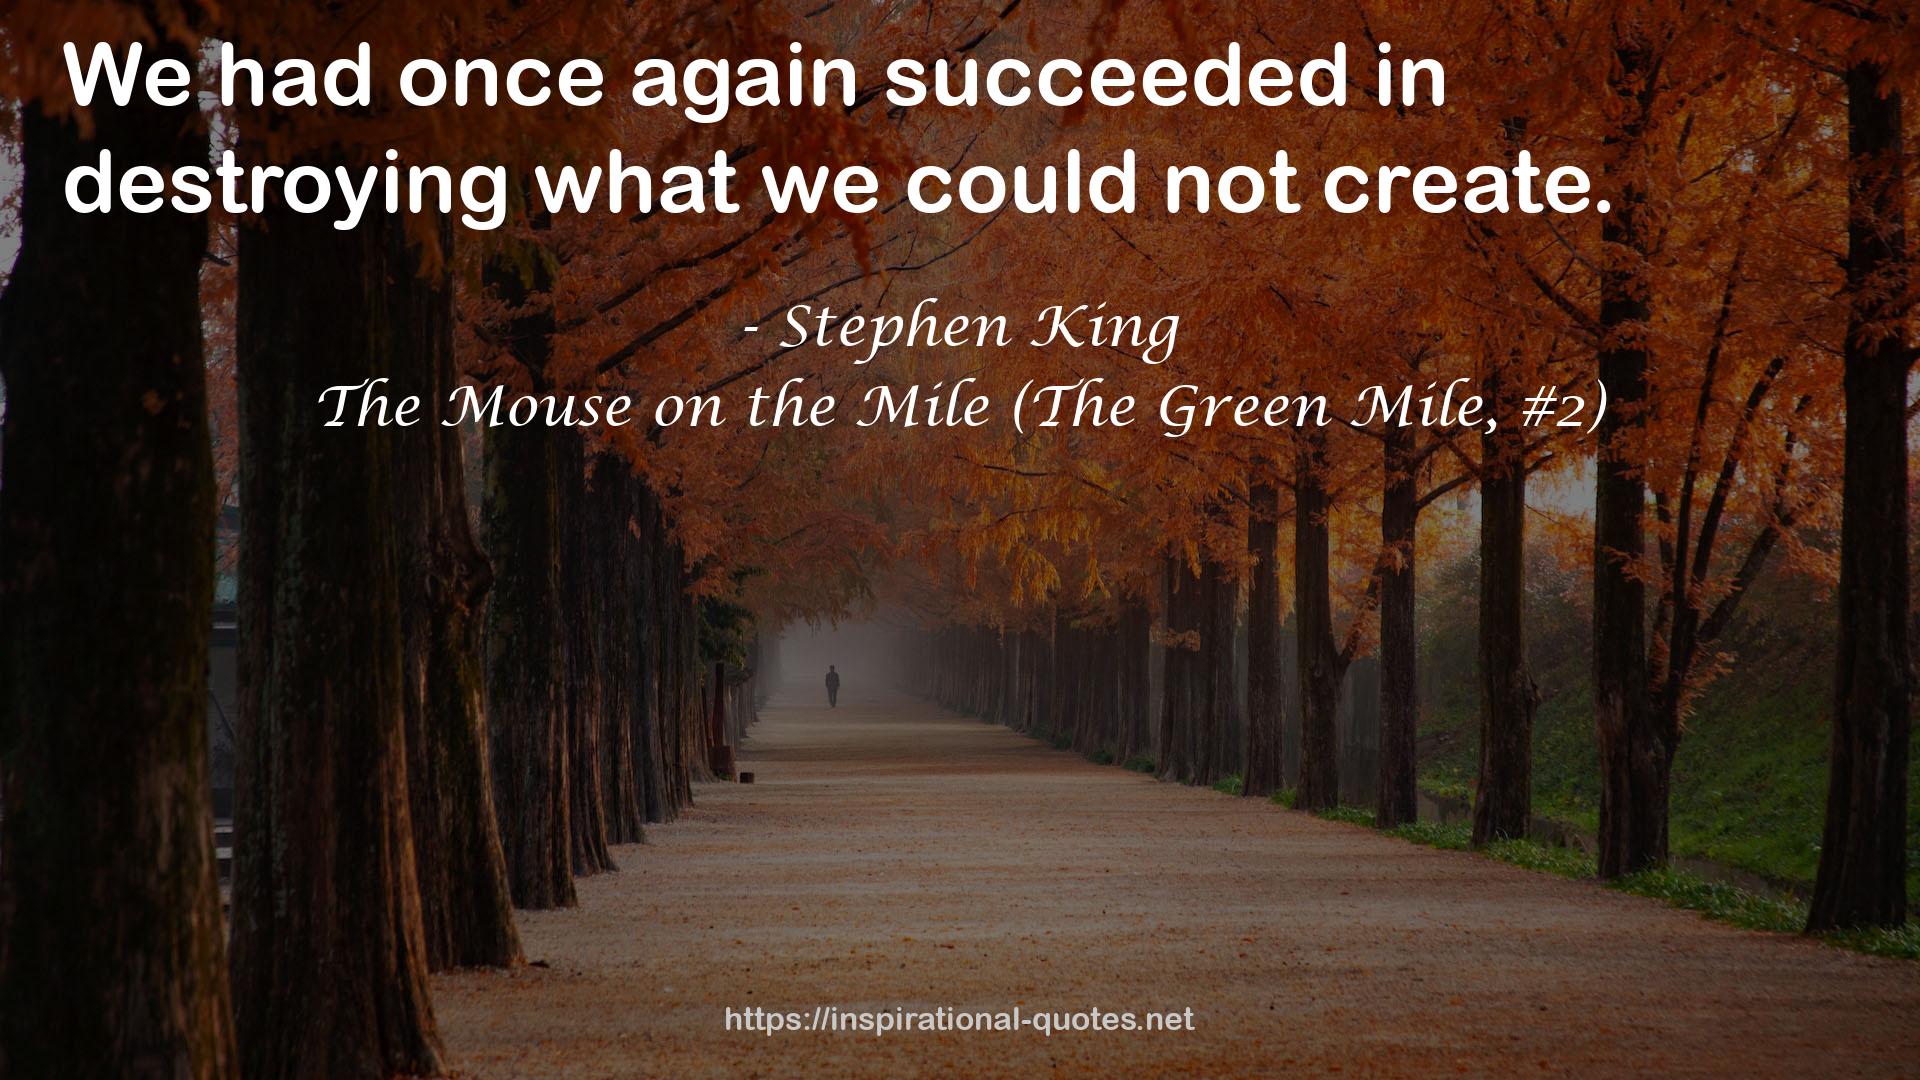 The Mouse on the Mile (The Green Mile, #2) QUOTES